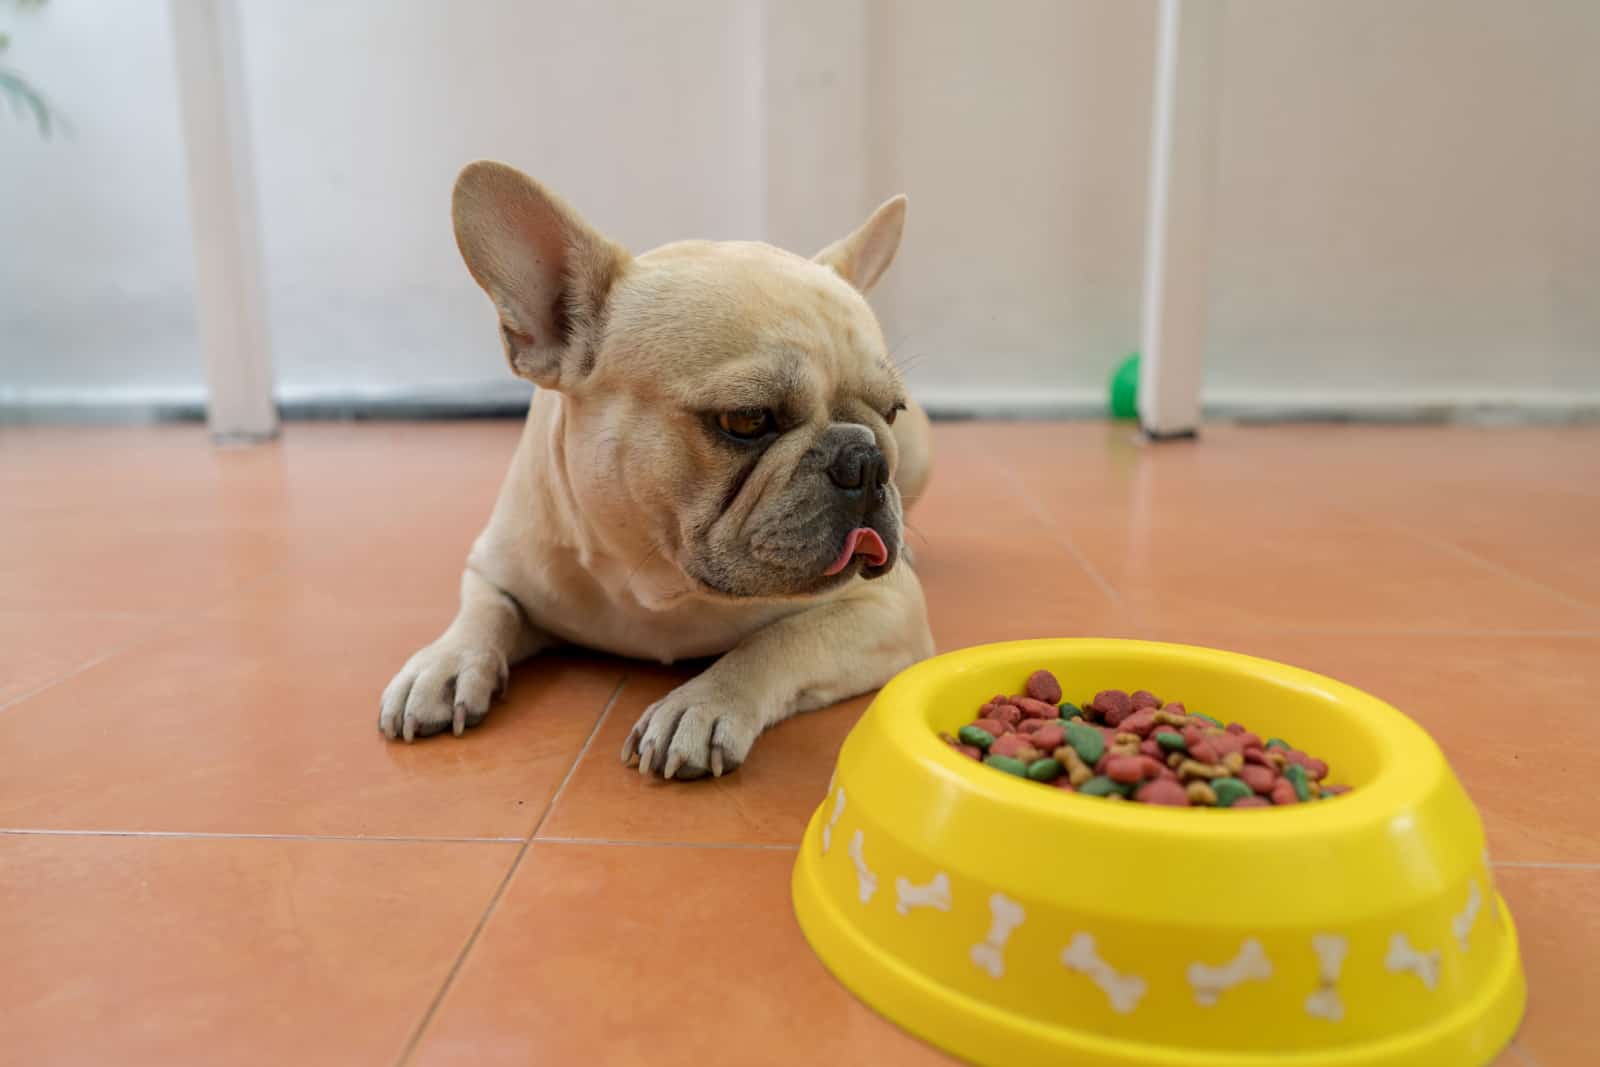 French Bulldog is busy with his meal.